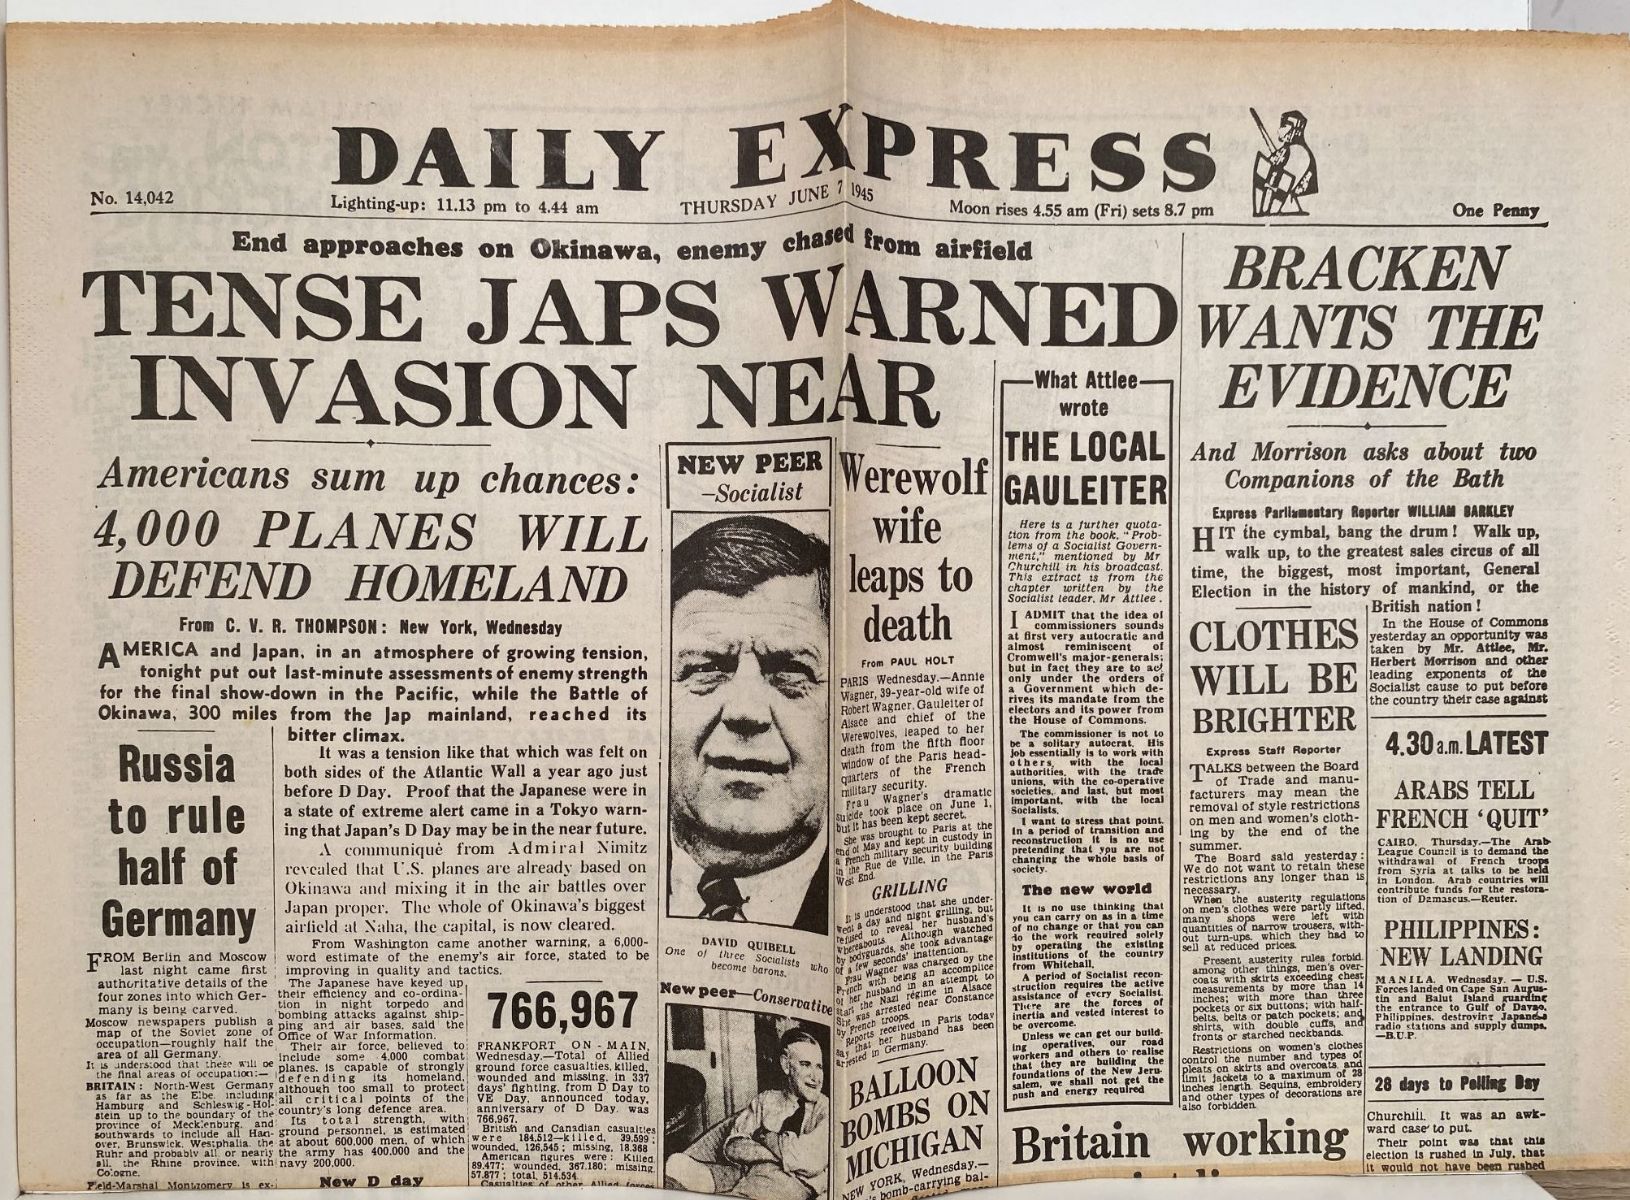 OLD WARTIME NEWSPAPER: Daily Express, Thursday 7th June 1945